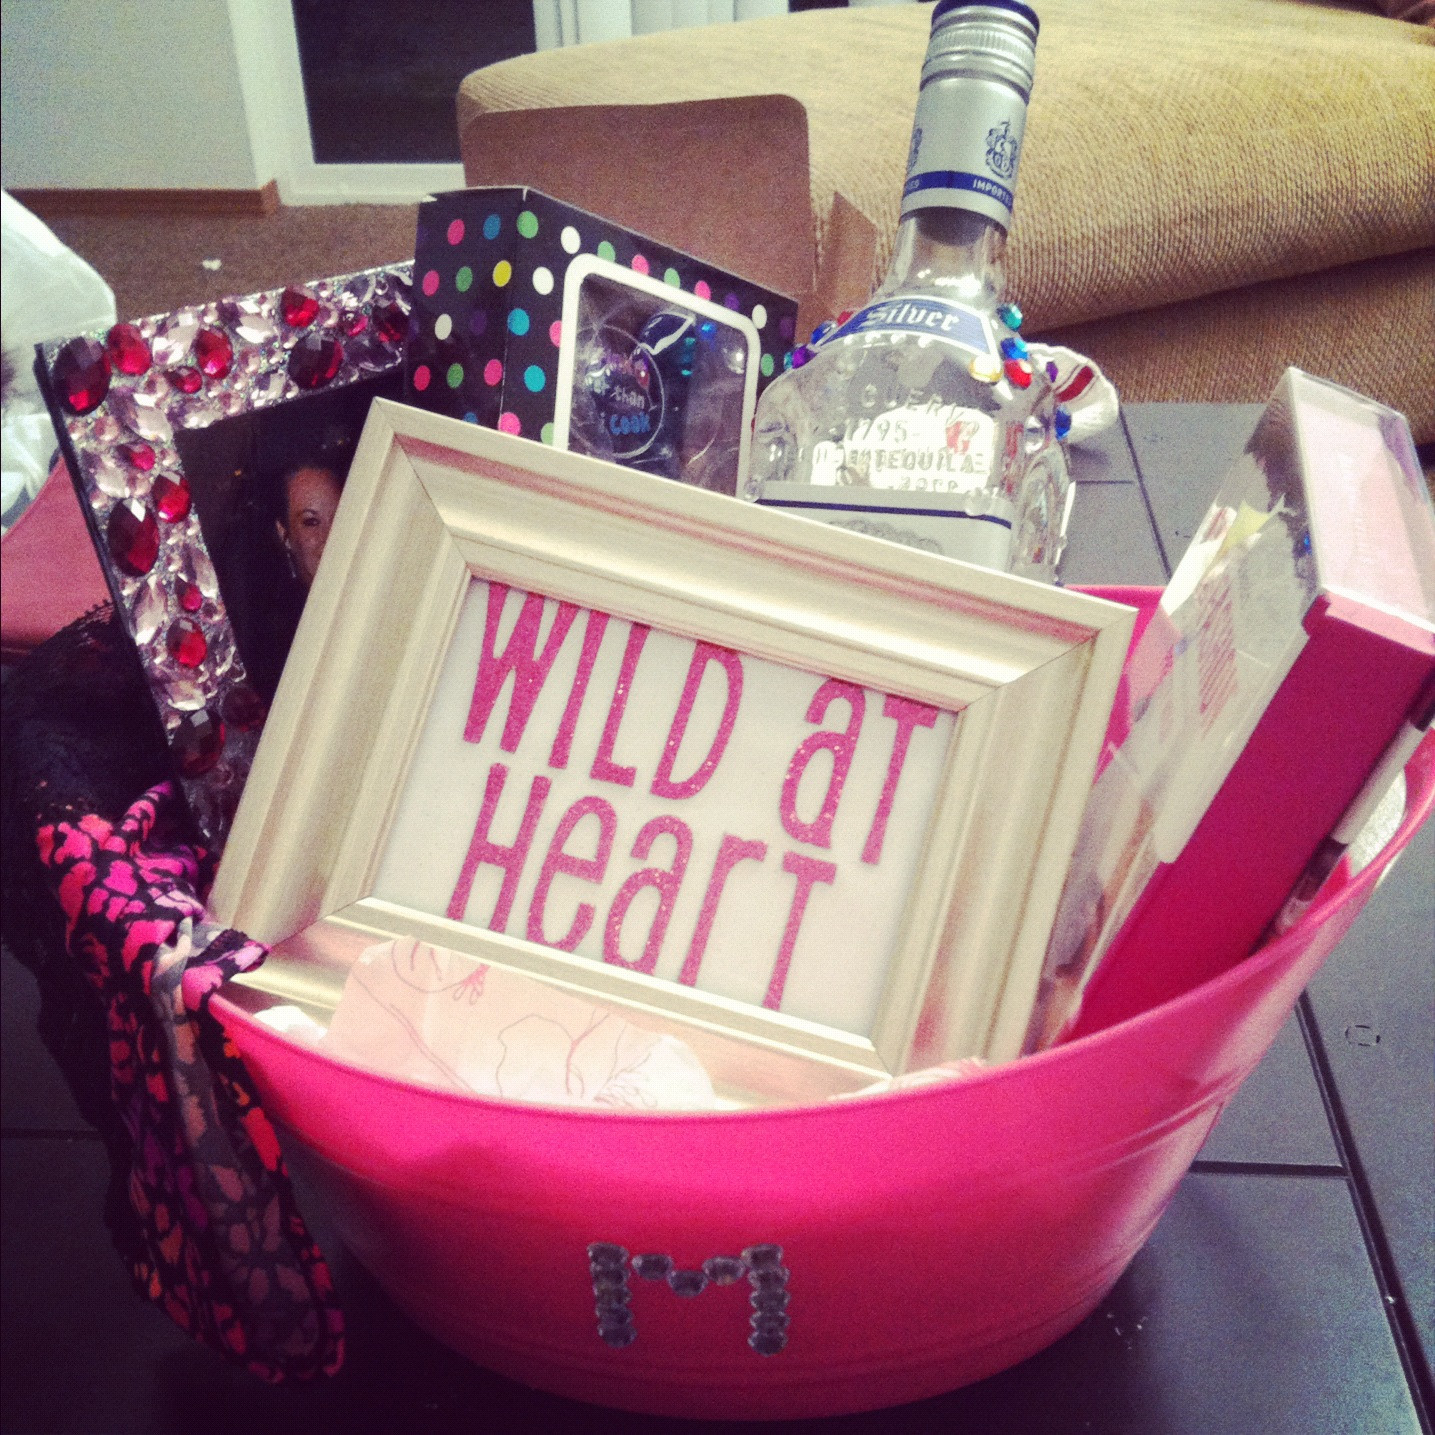 Diy Birthday Gifts For Her
 Moments Don t Collect Dust DIY Wild at Heart Gift Basket